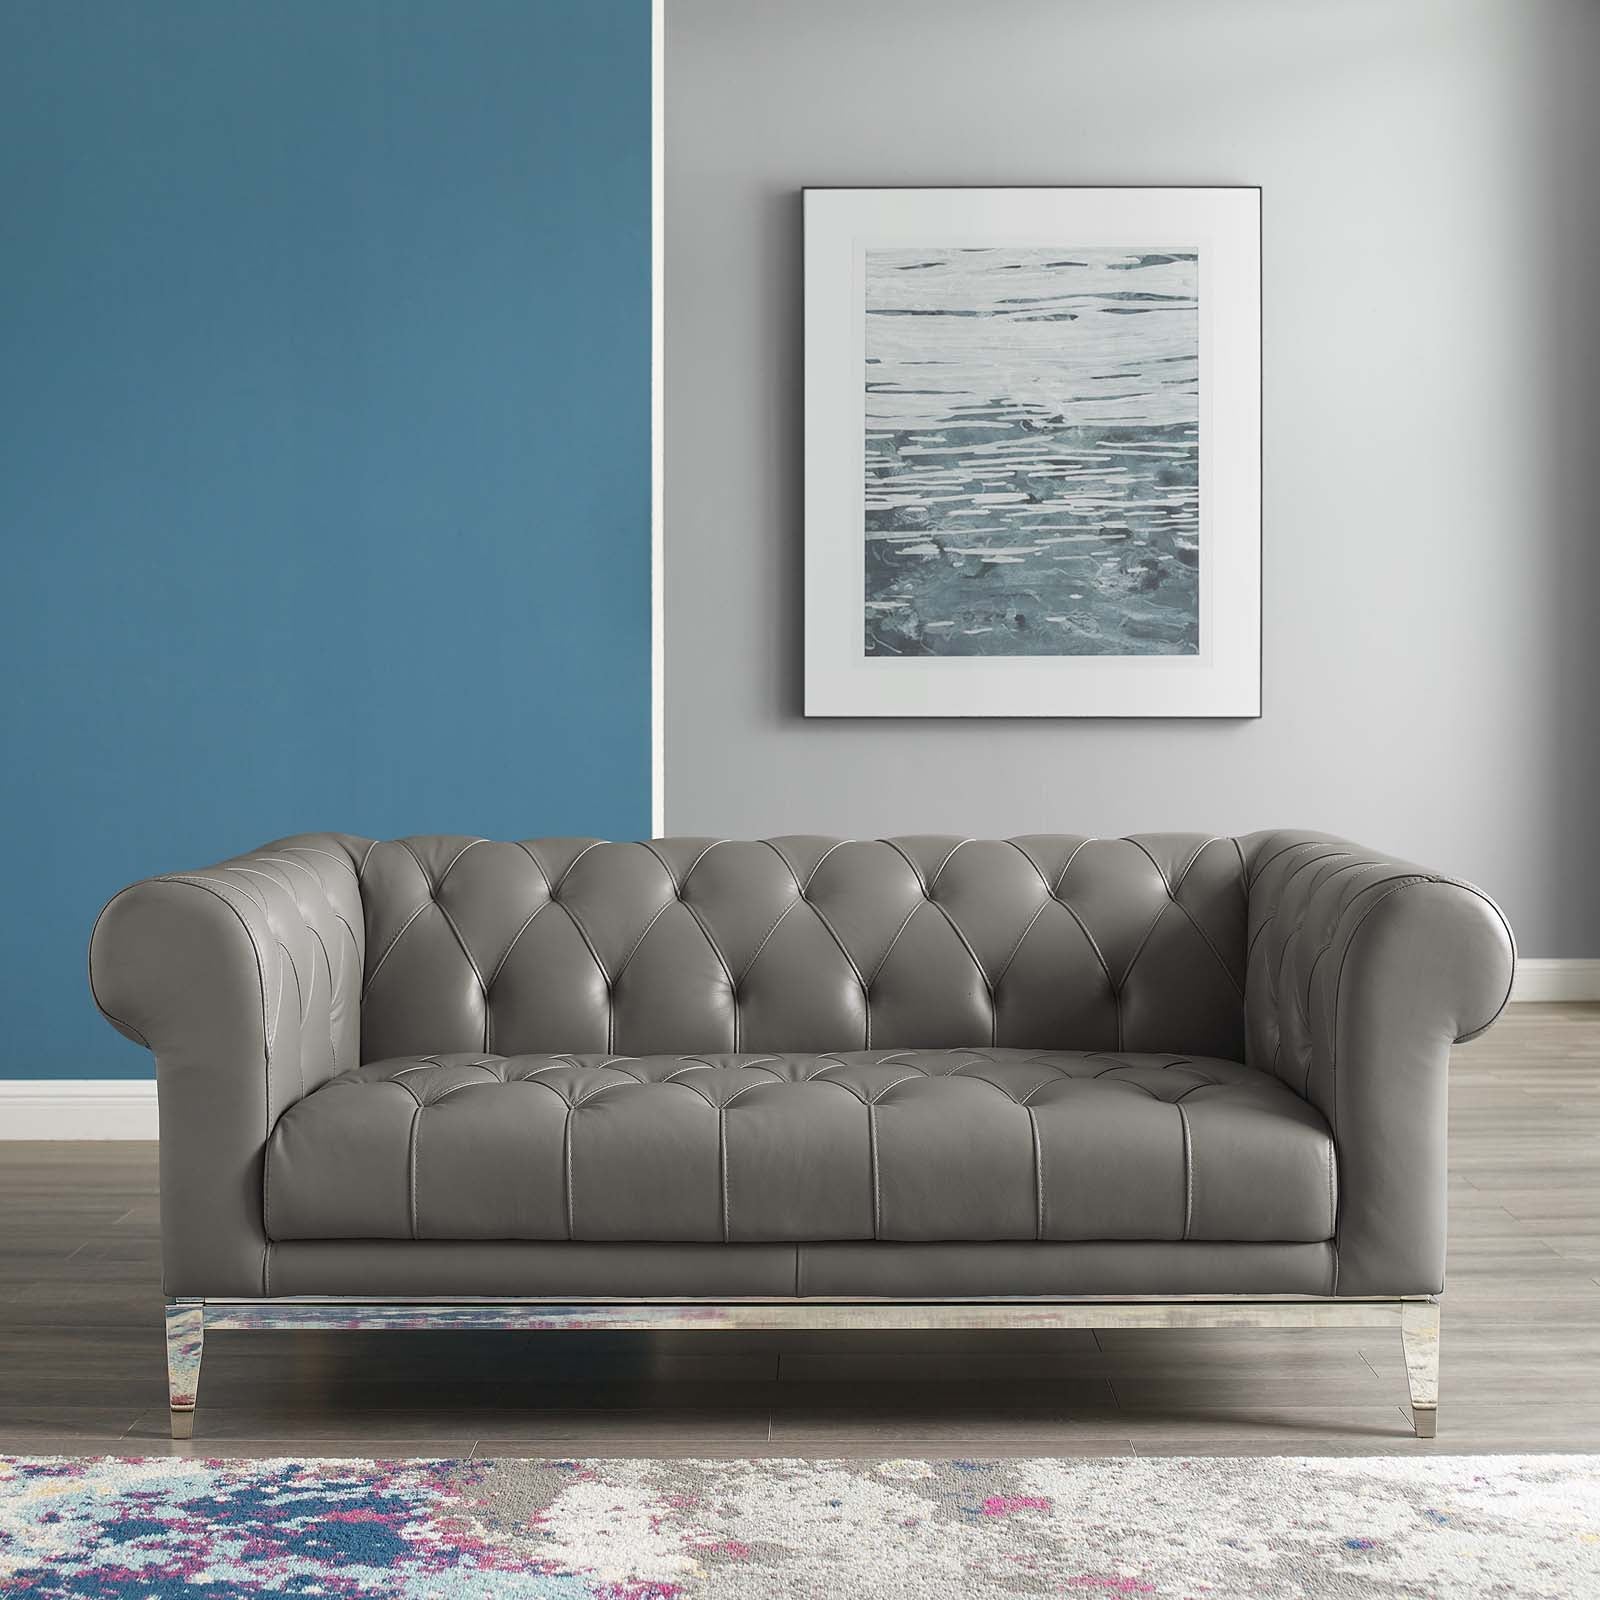 Idyll Tufted Button Upholstered Leather Chesterfield Loveseat - East Shore Modern Home Furnishings